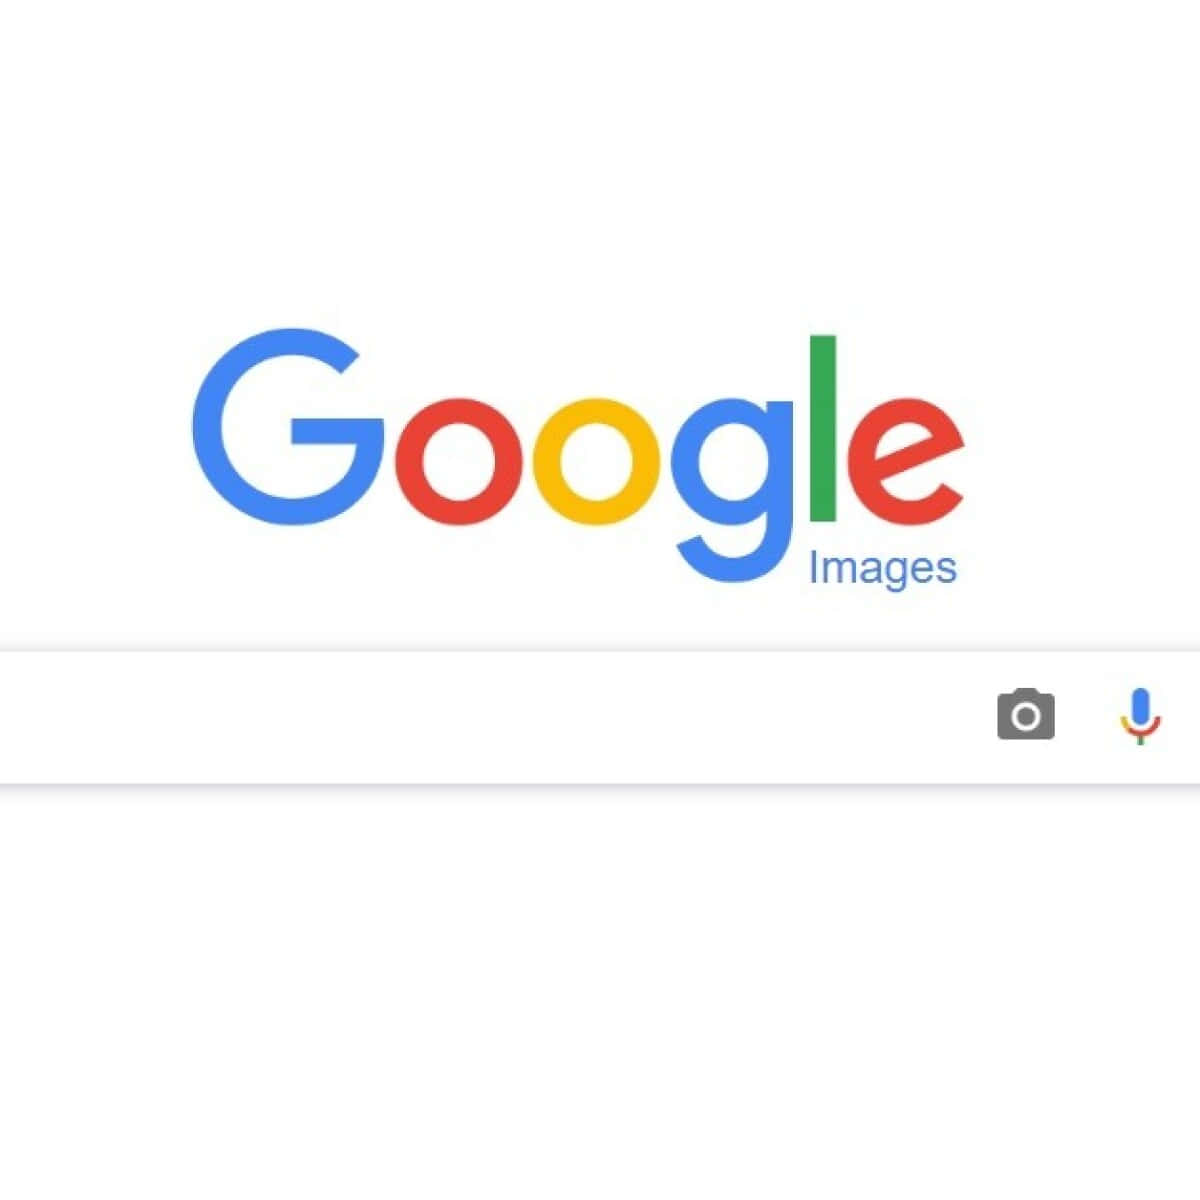 Google Images Logo Picture